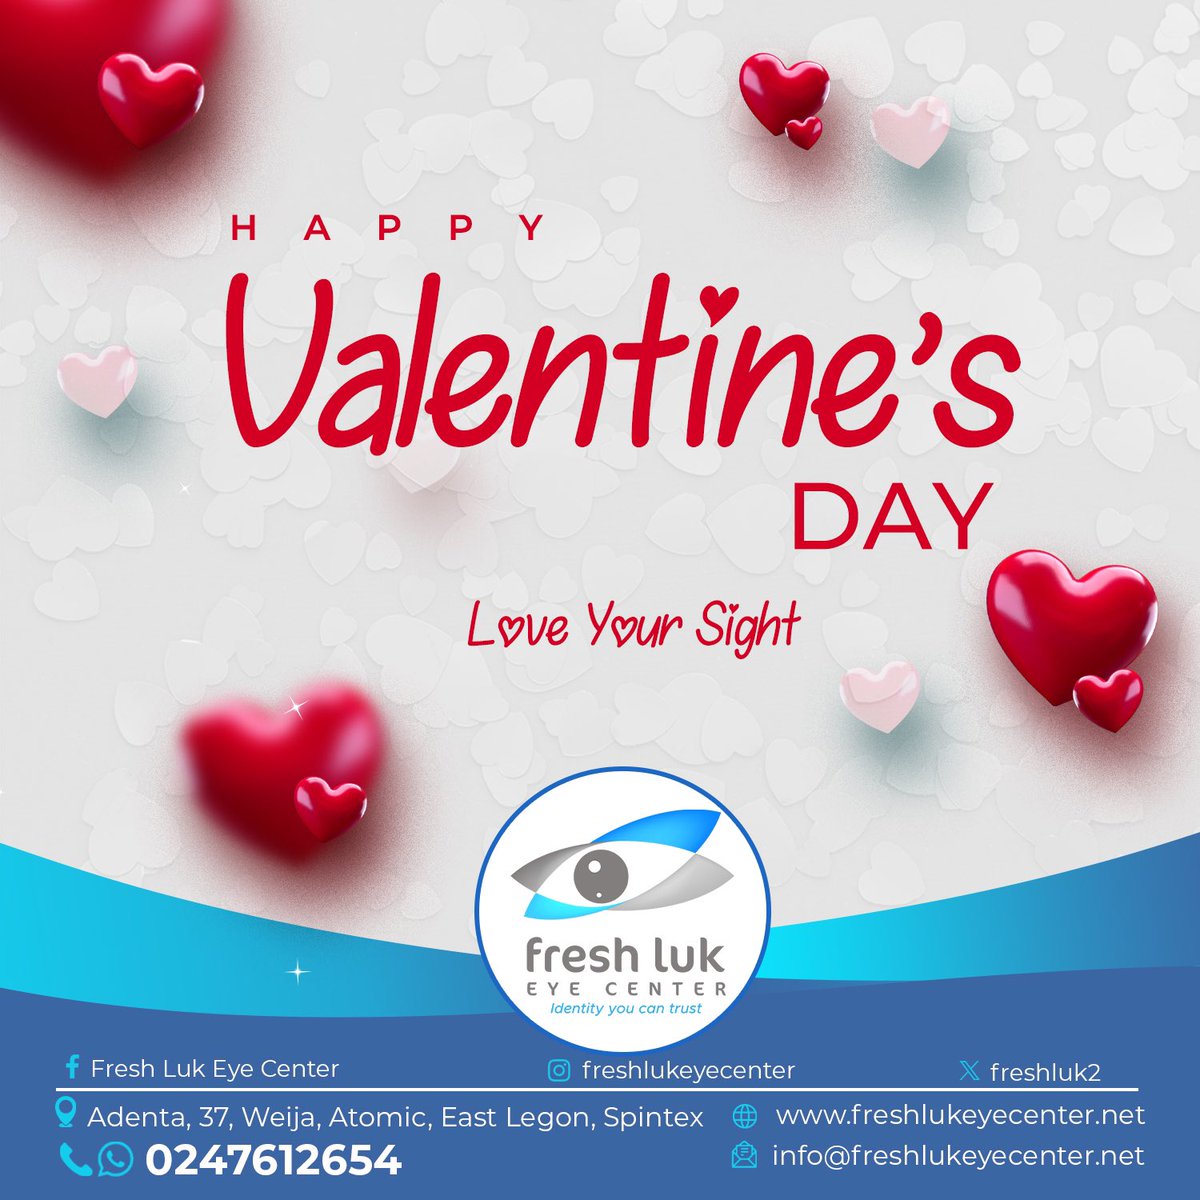 Love is in the air, and so is the importance of eye health! 

Celebrating Valentine’s Day with clear vision and a heart full of love ❤️

#valentines #valentinespecial #valentinesdaygift #eyehealthmatters #eyecareeverywhere #loveyoursight
…
…